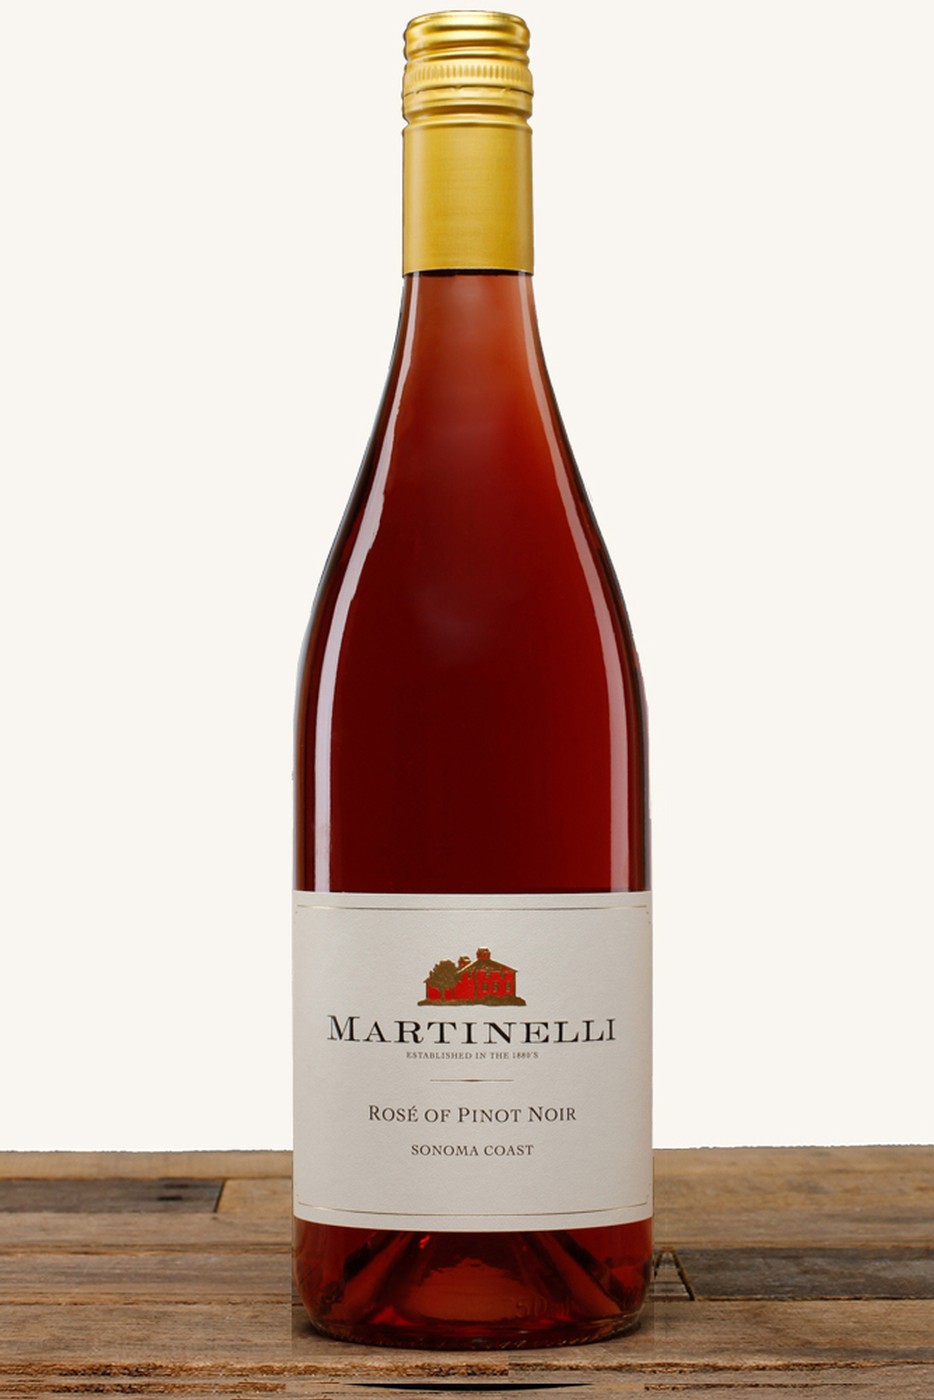 2023 Martinelli Rose of Pinot Noir - click image for full description